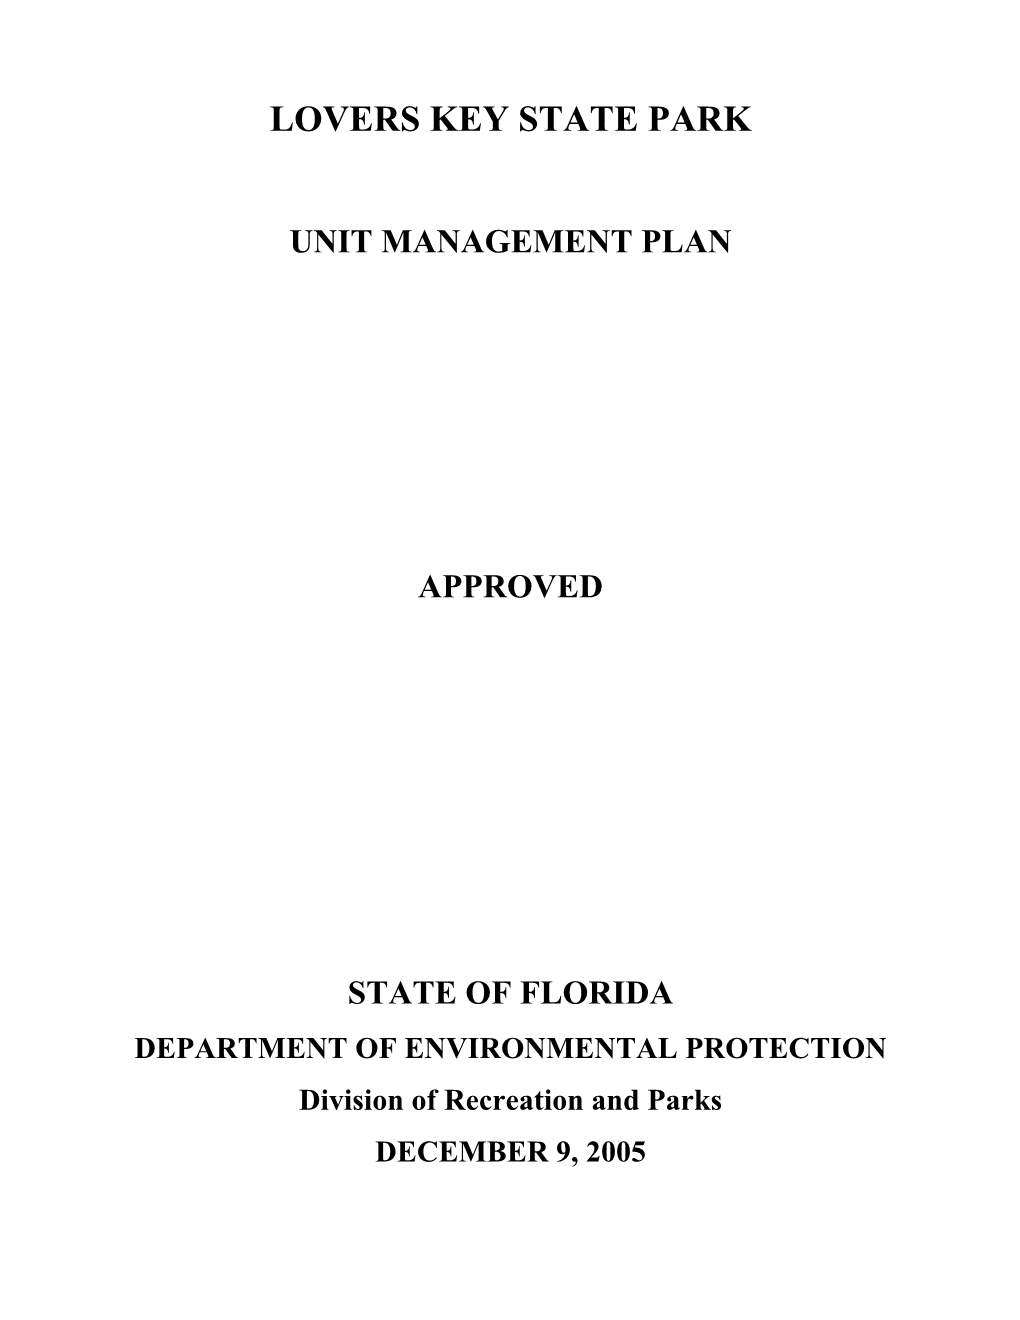 2005 Lovers Key State Park Approved Plan.Pdf